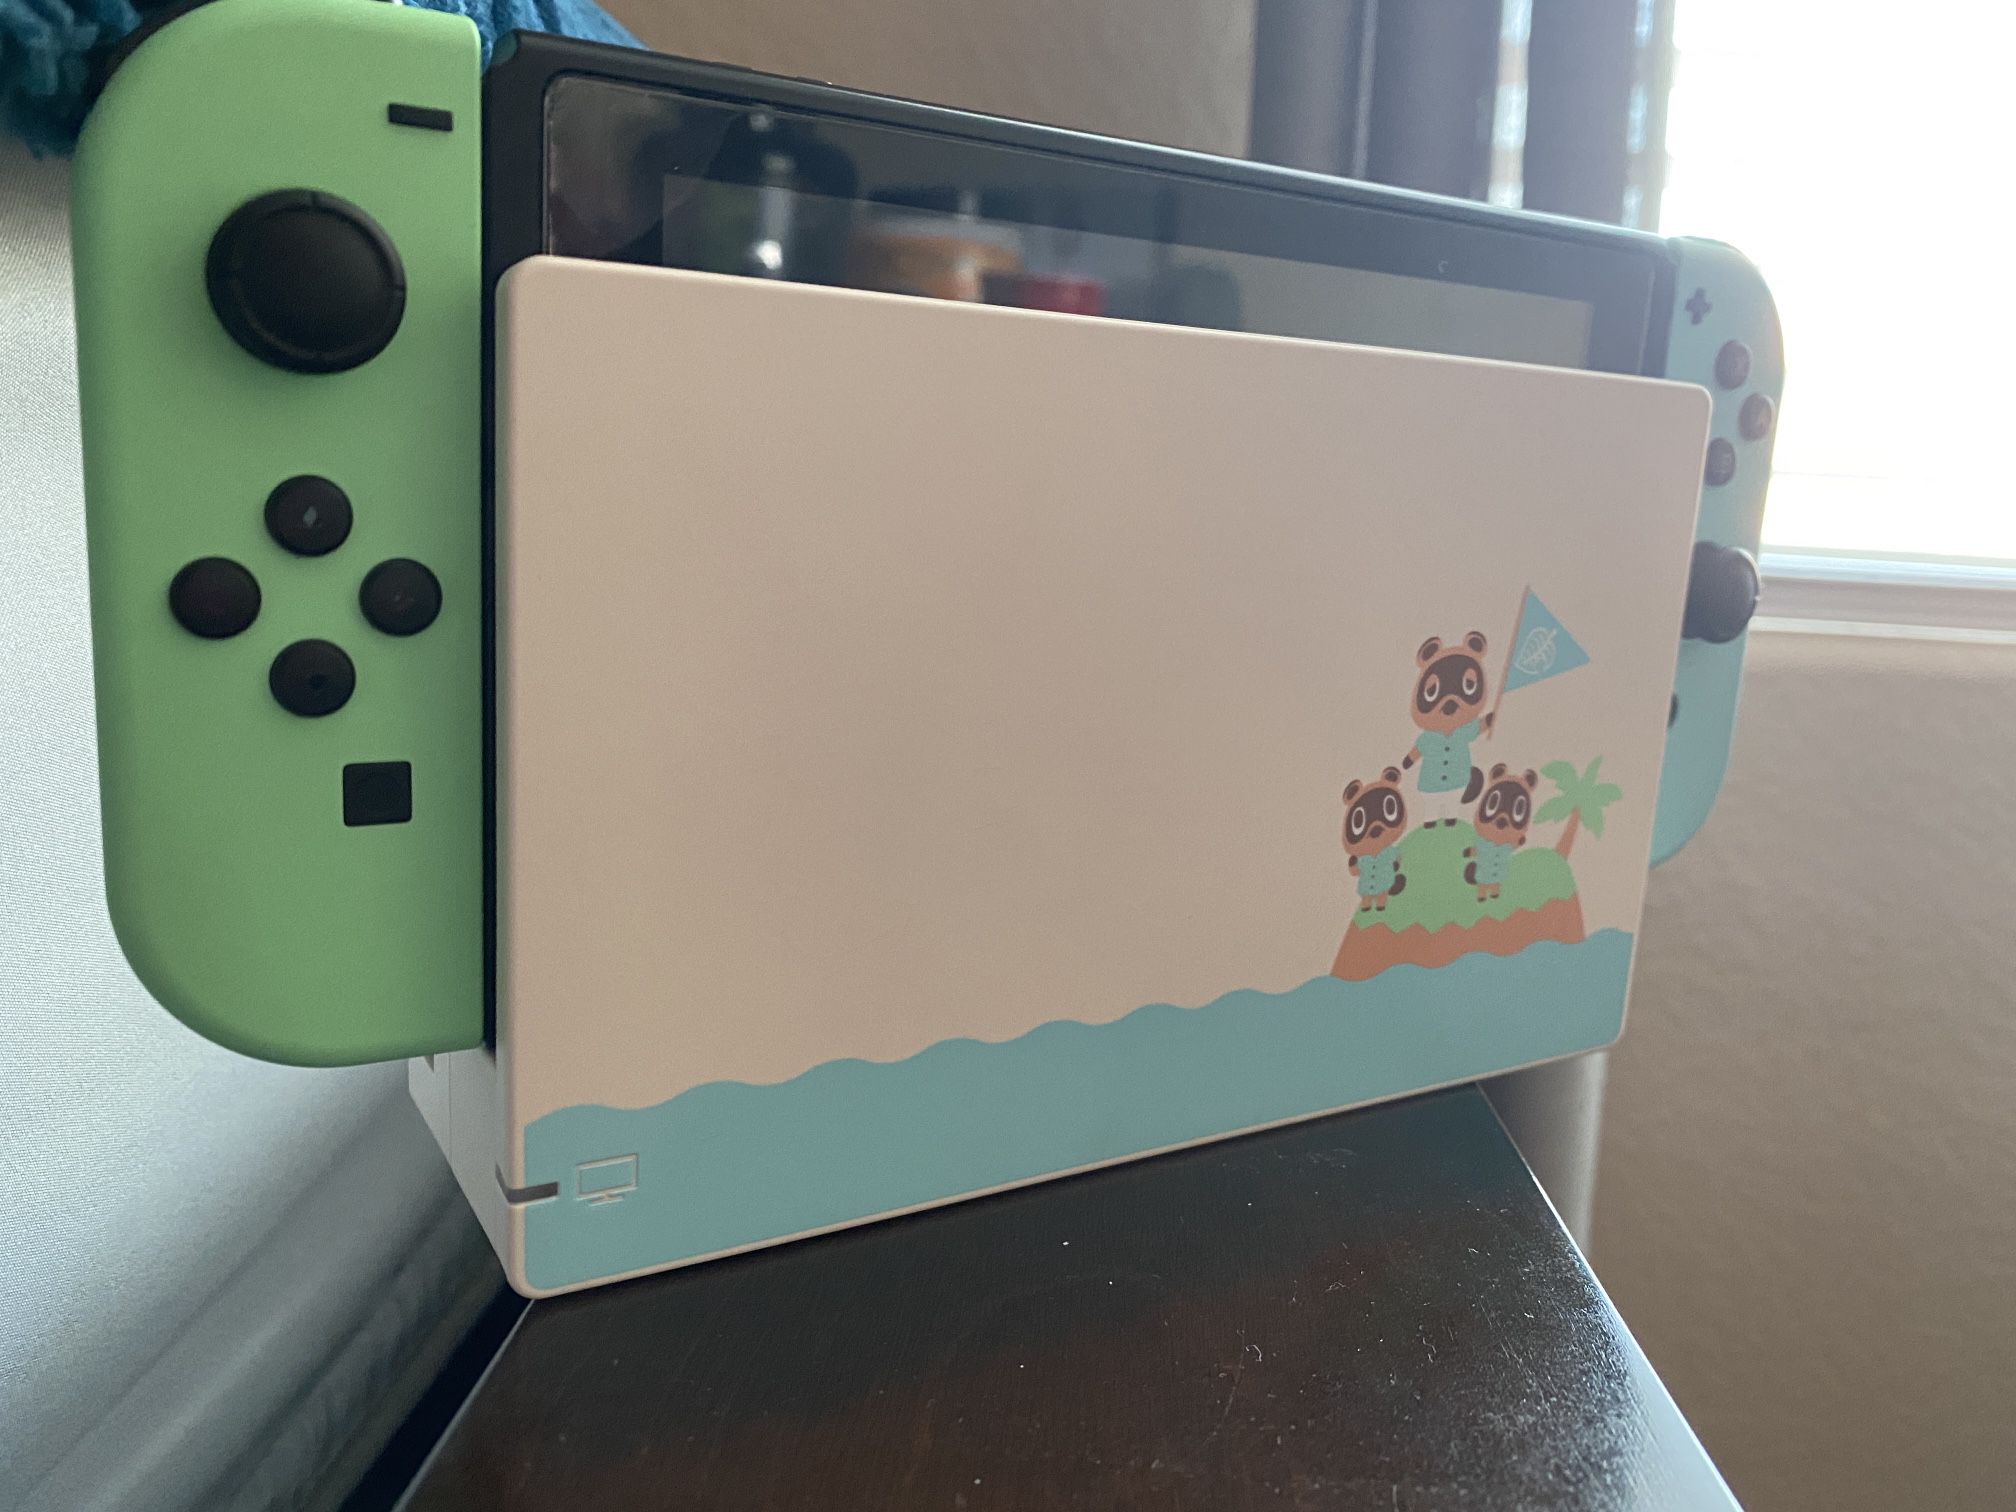 Nitendo Switch With Games Included